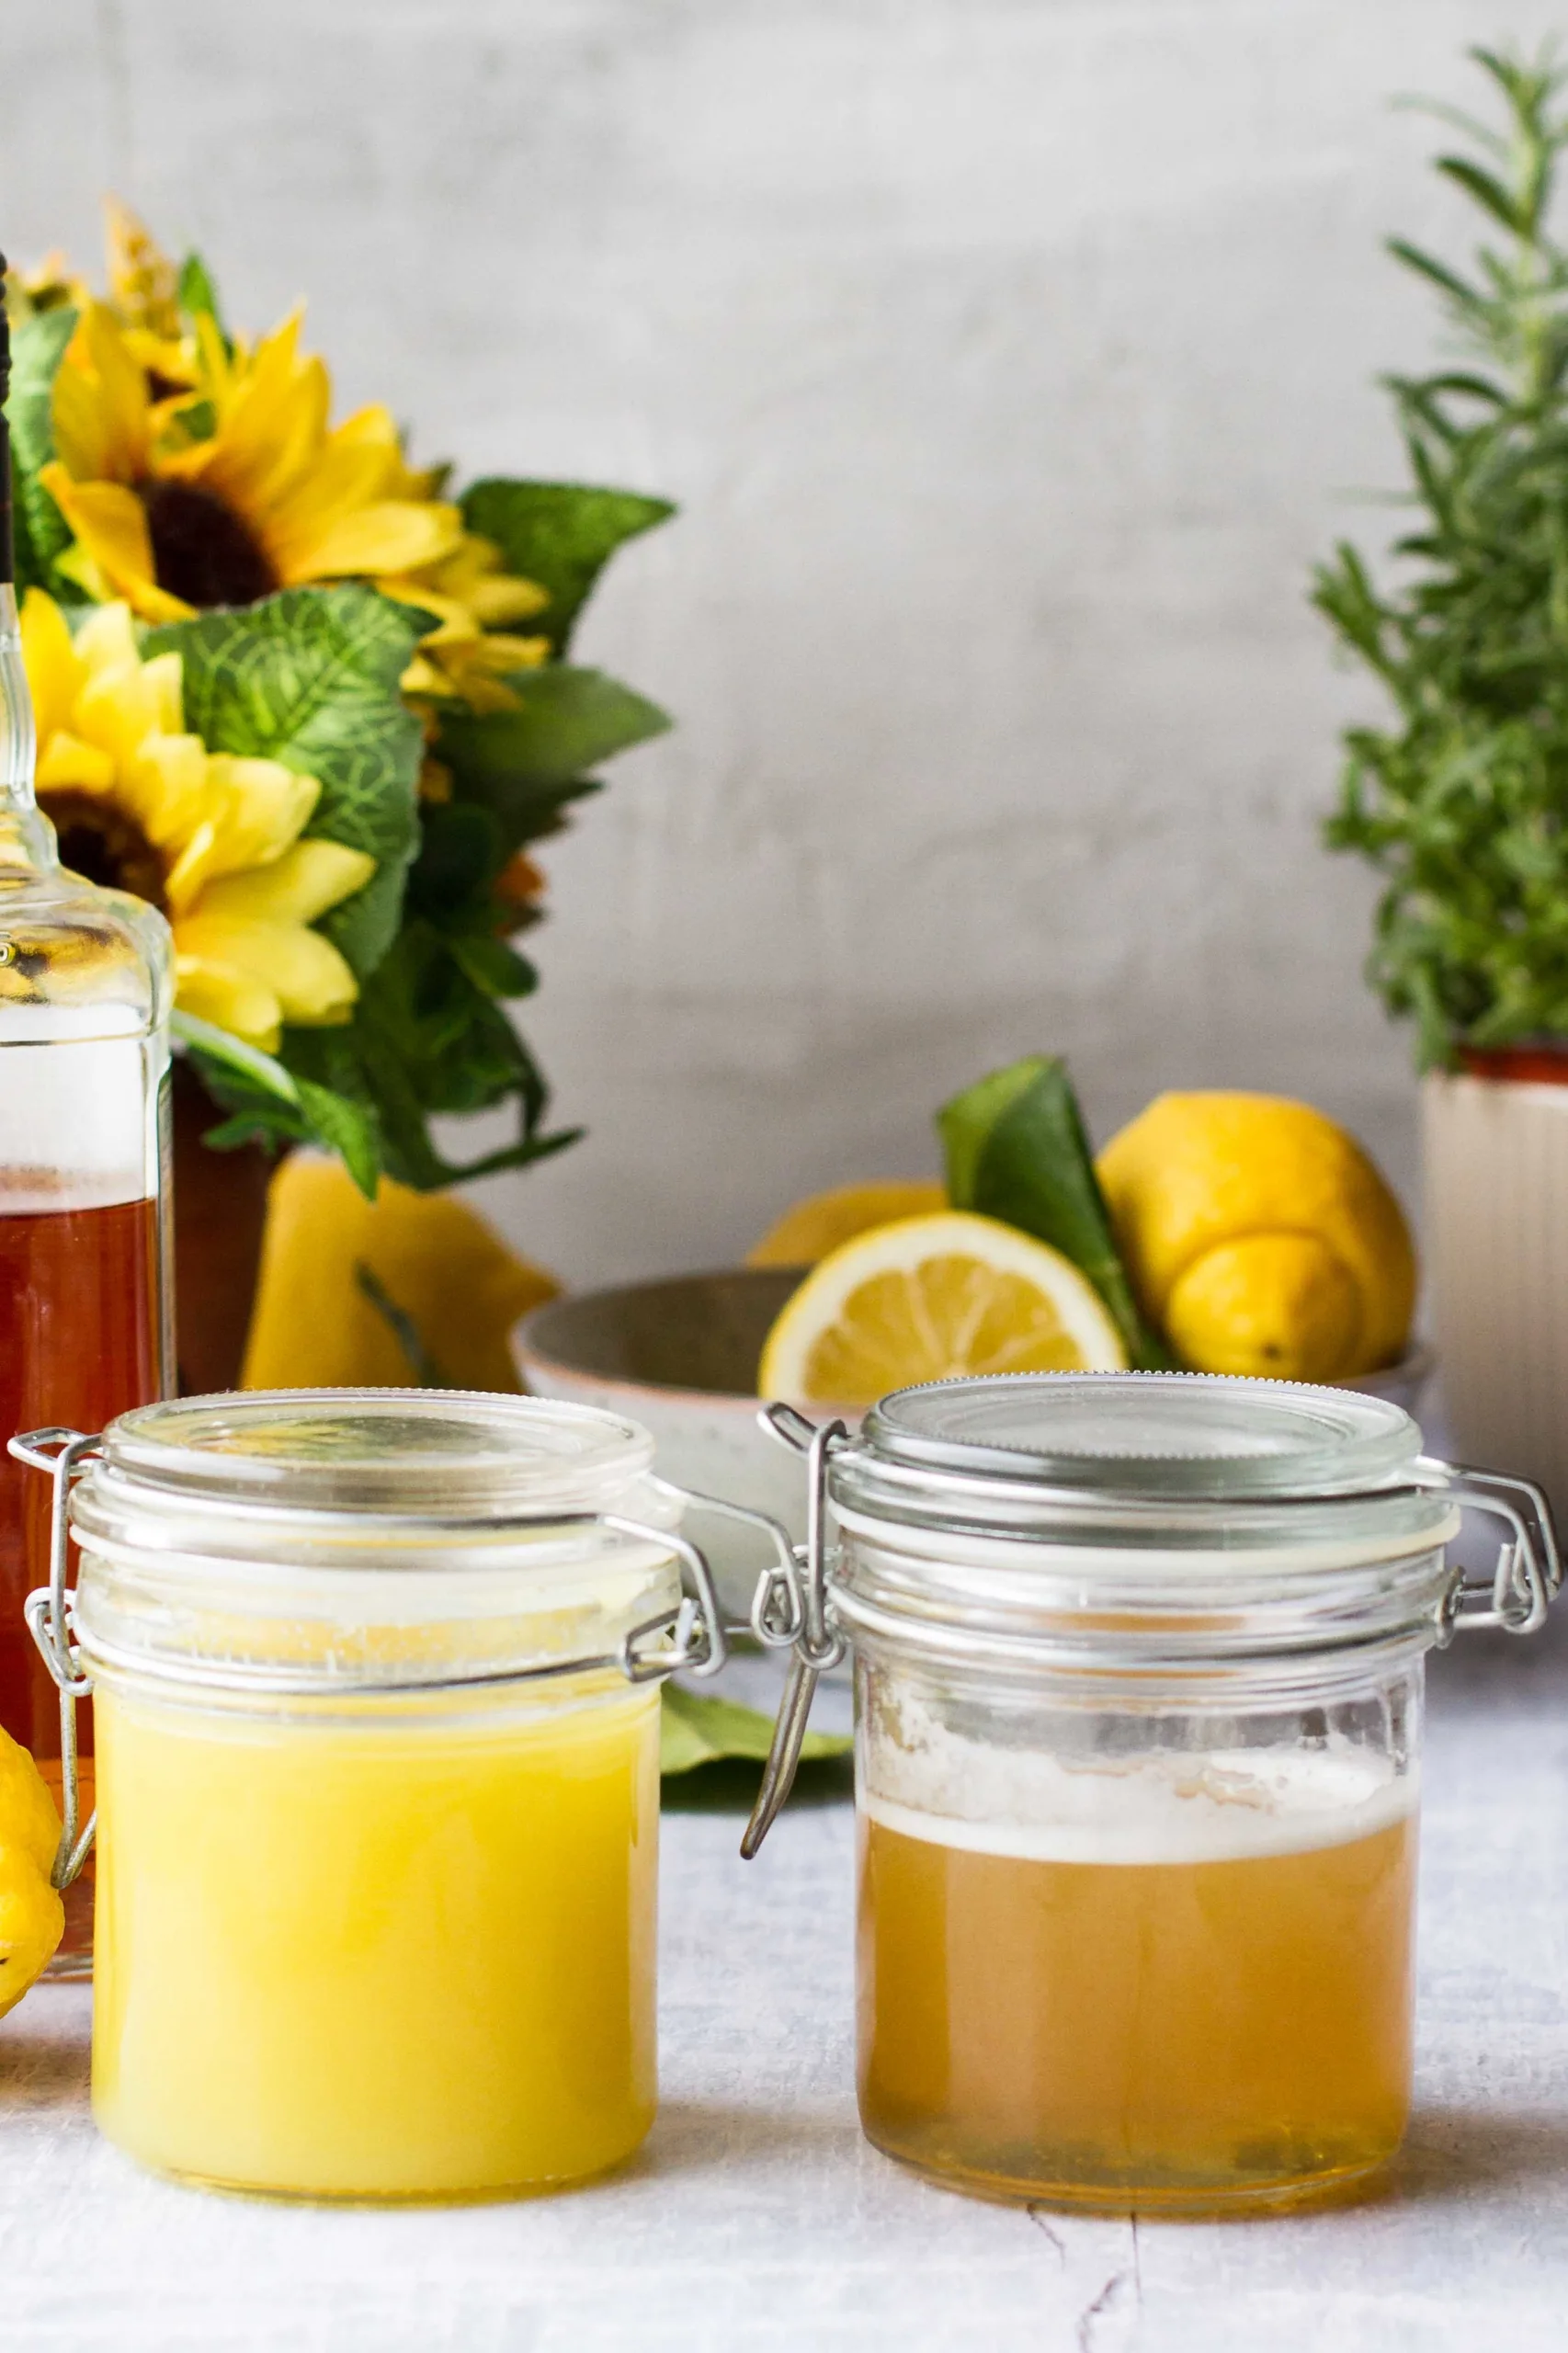 Two glass jars with syrups: one ginger and one honey.